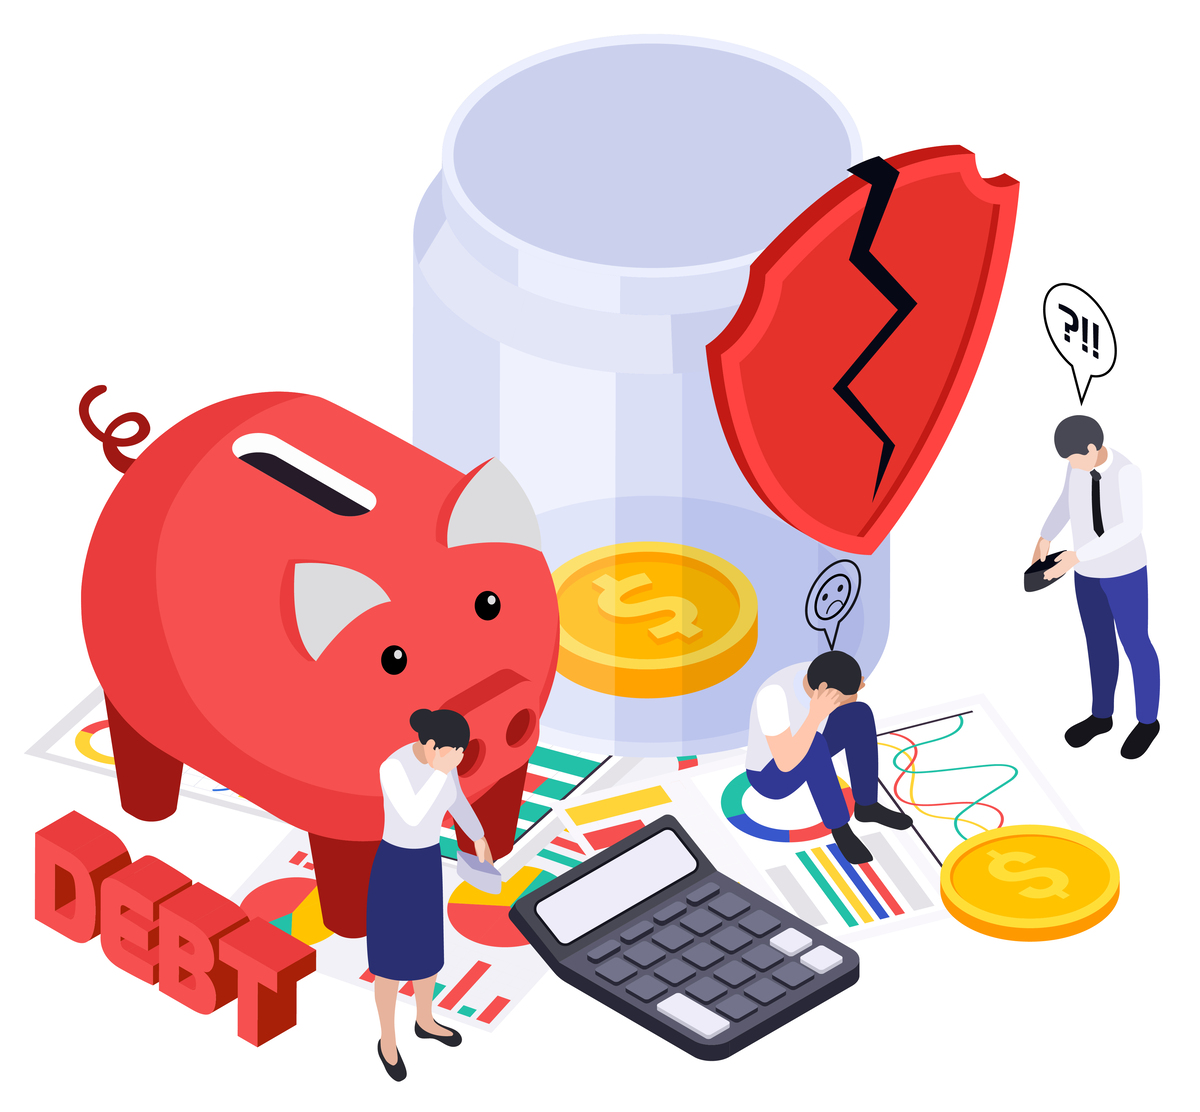 Three people are sulking while surrounded by a red piggy bank, a broken security icon, and an almost empty jar